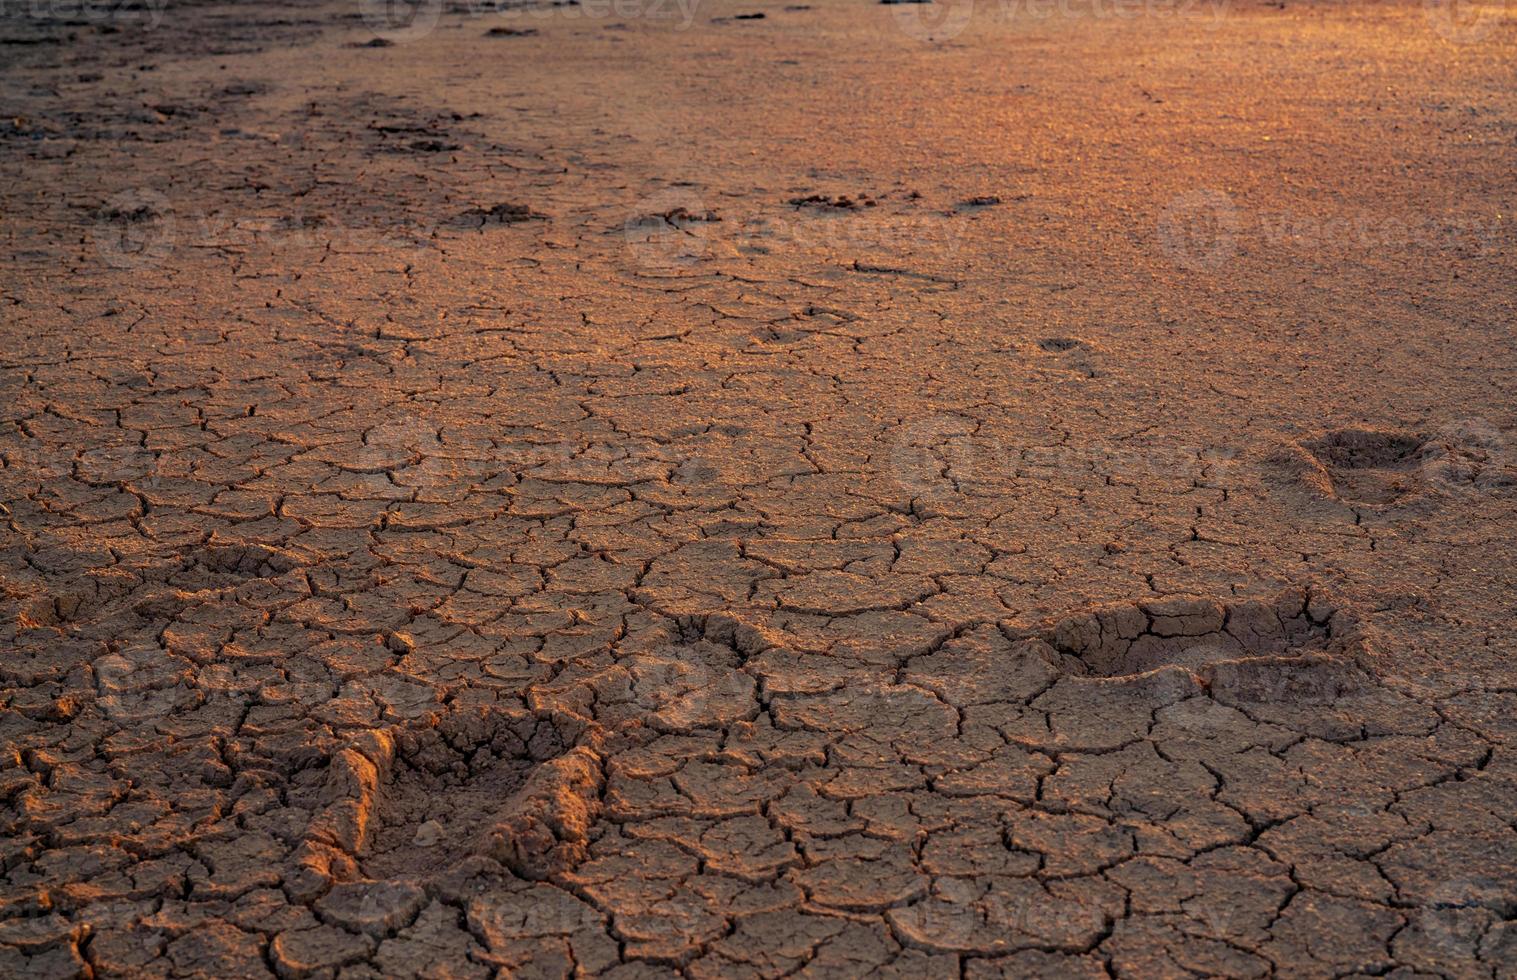 Climate change and drought land. Water crisis. Arid climate. Crack soil. Global warming. Environment problem. Nature disaster. Dry soil texture background. Footprint on drought land with sun light. photo